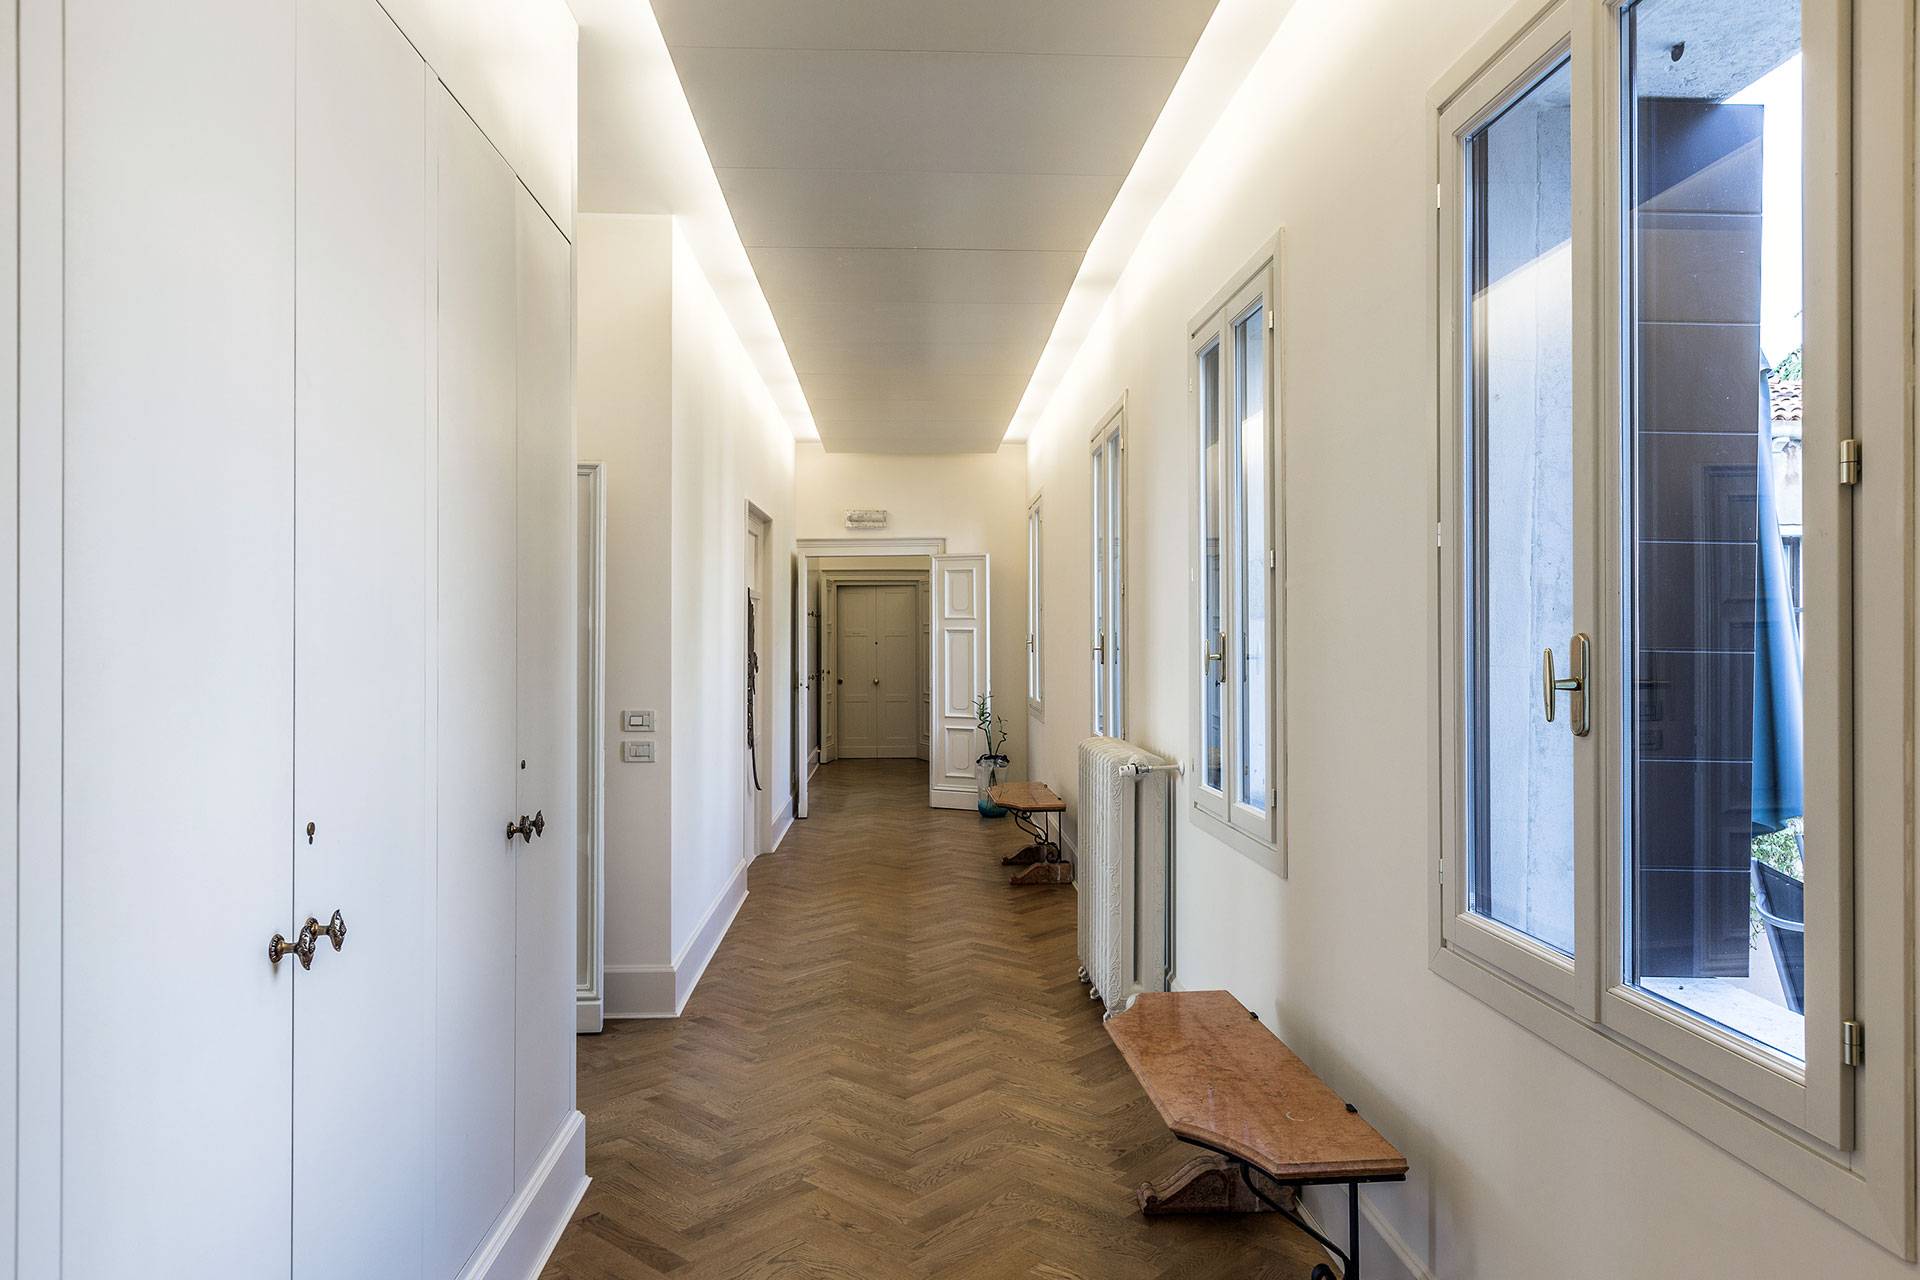 the communal hallway that connects the apartment with the shared terrace